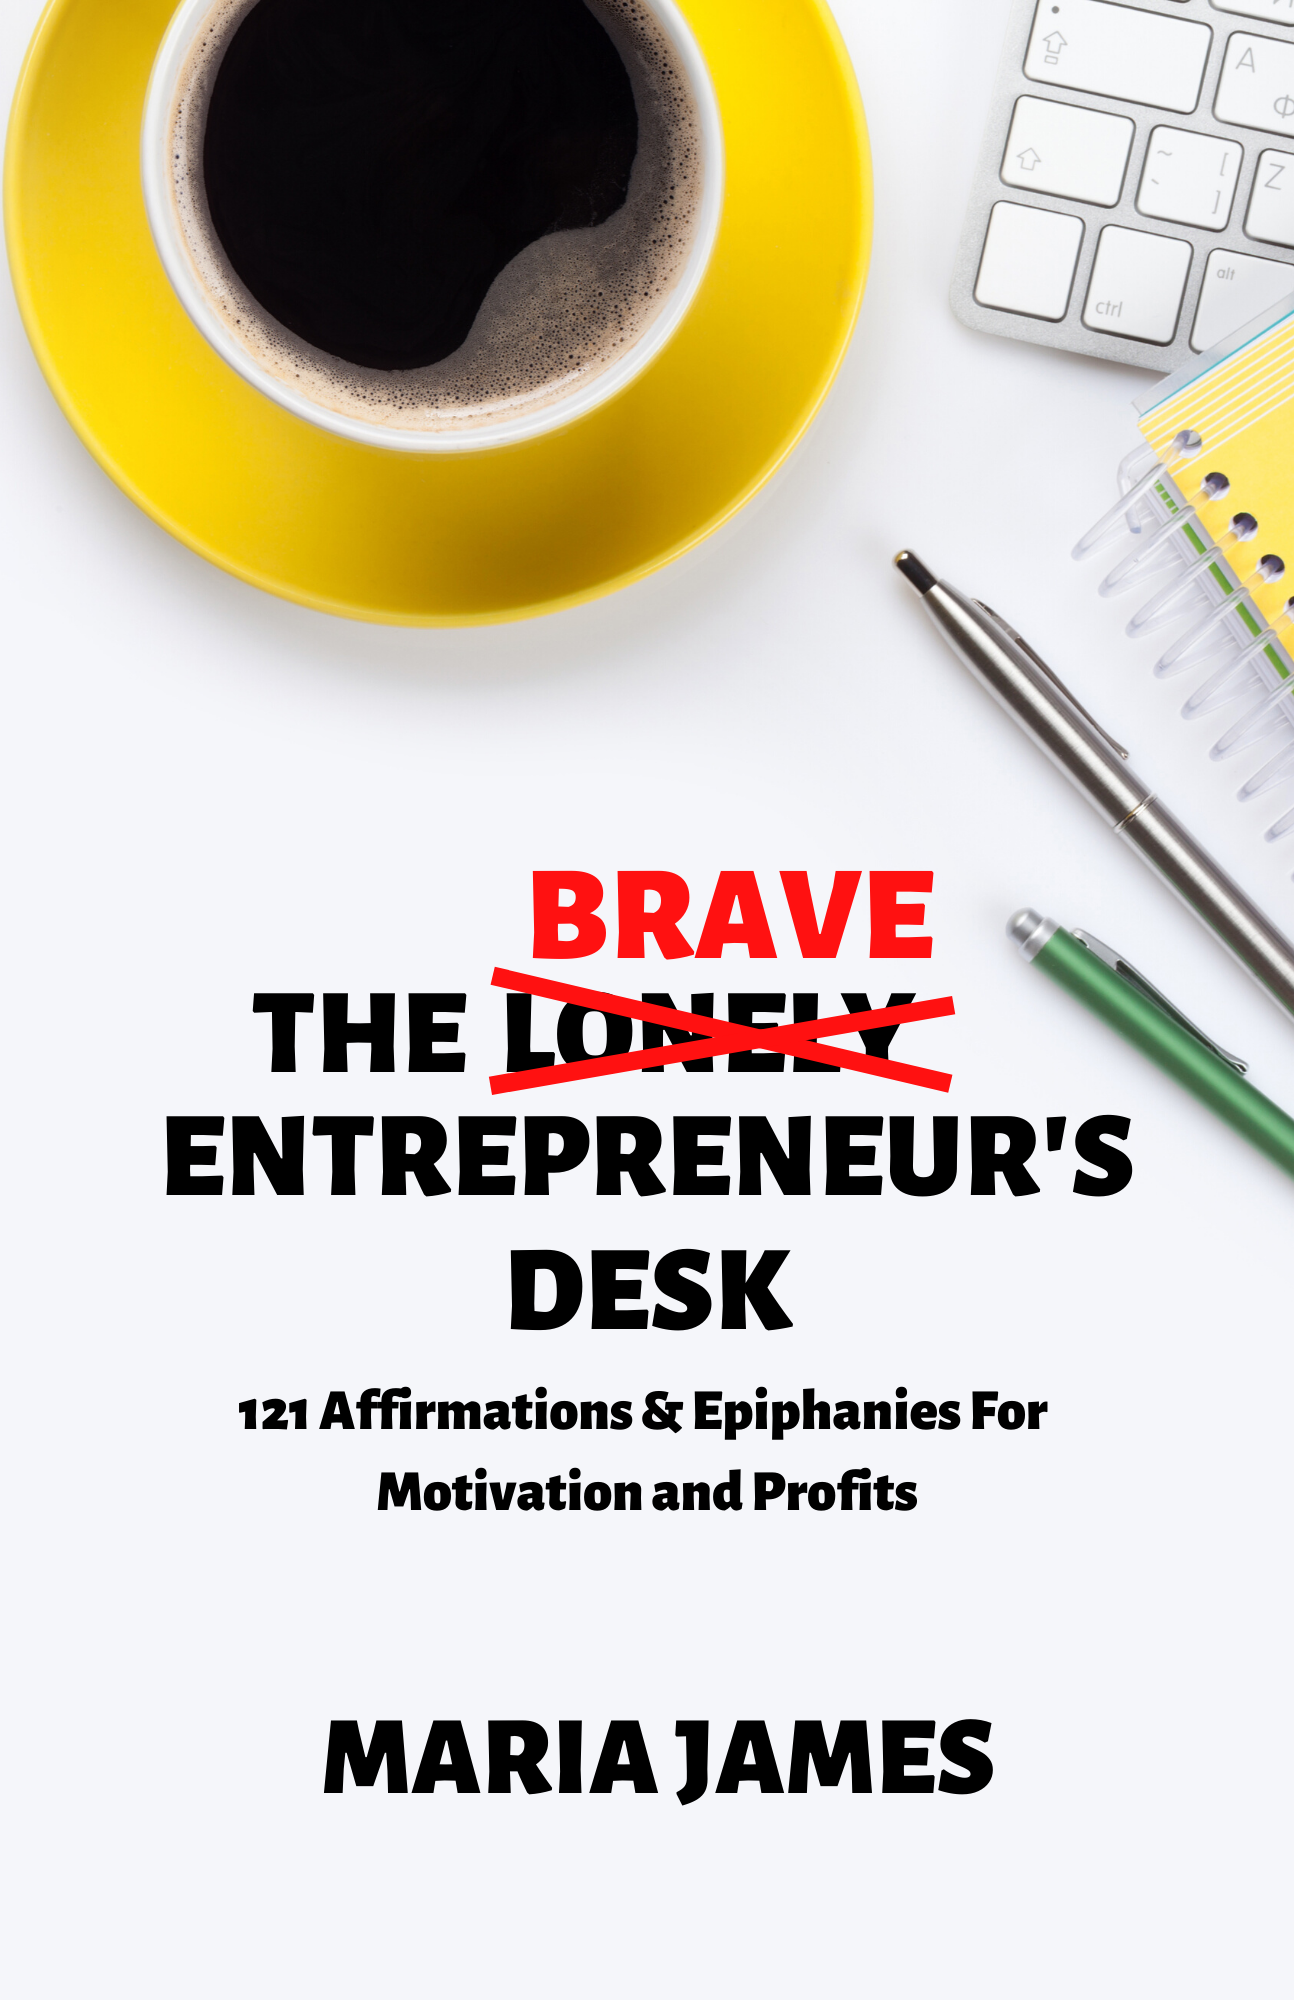 FREE: The Brave Entrepreneur’s Desk: 121 Affirmations & Epiphanies for Motivation and Profits by Maria James